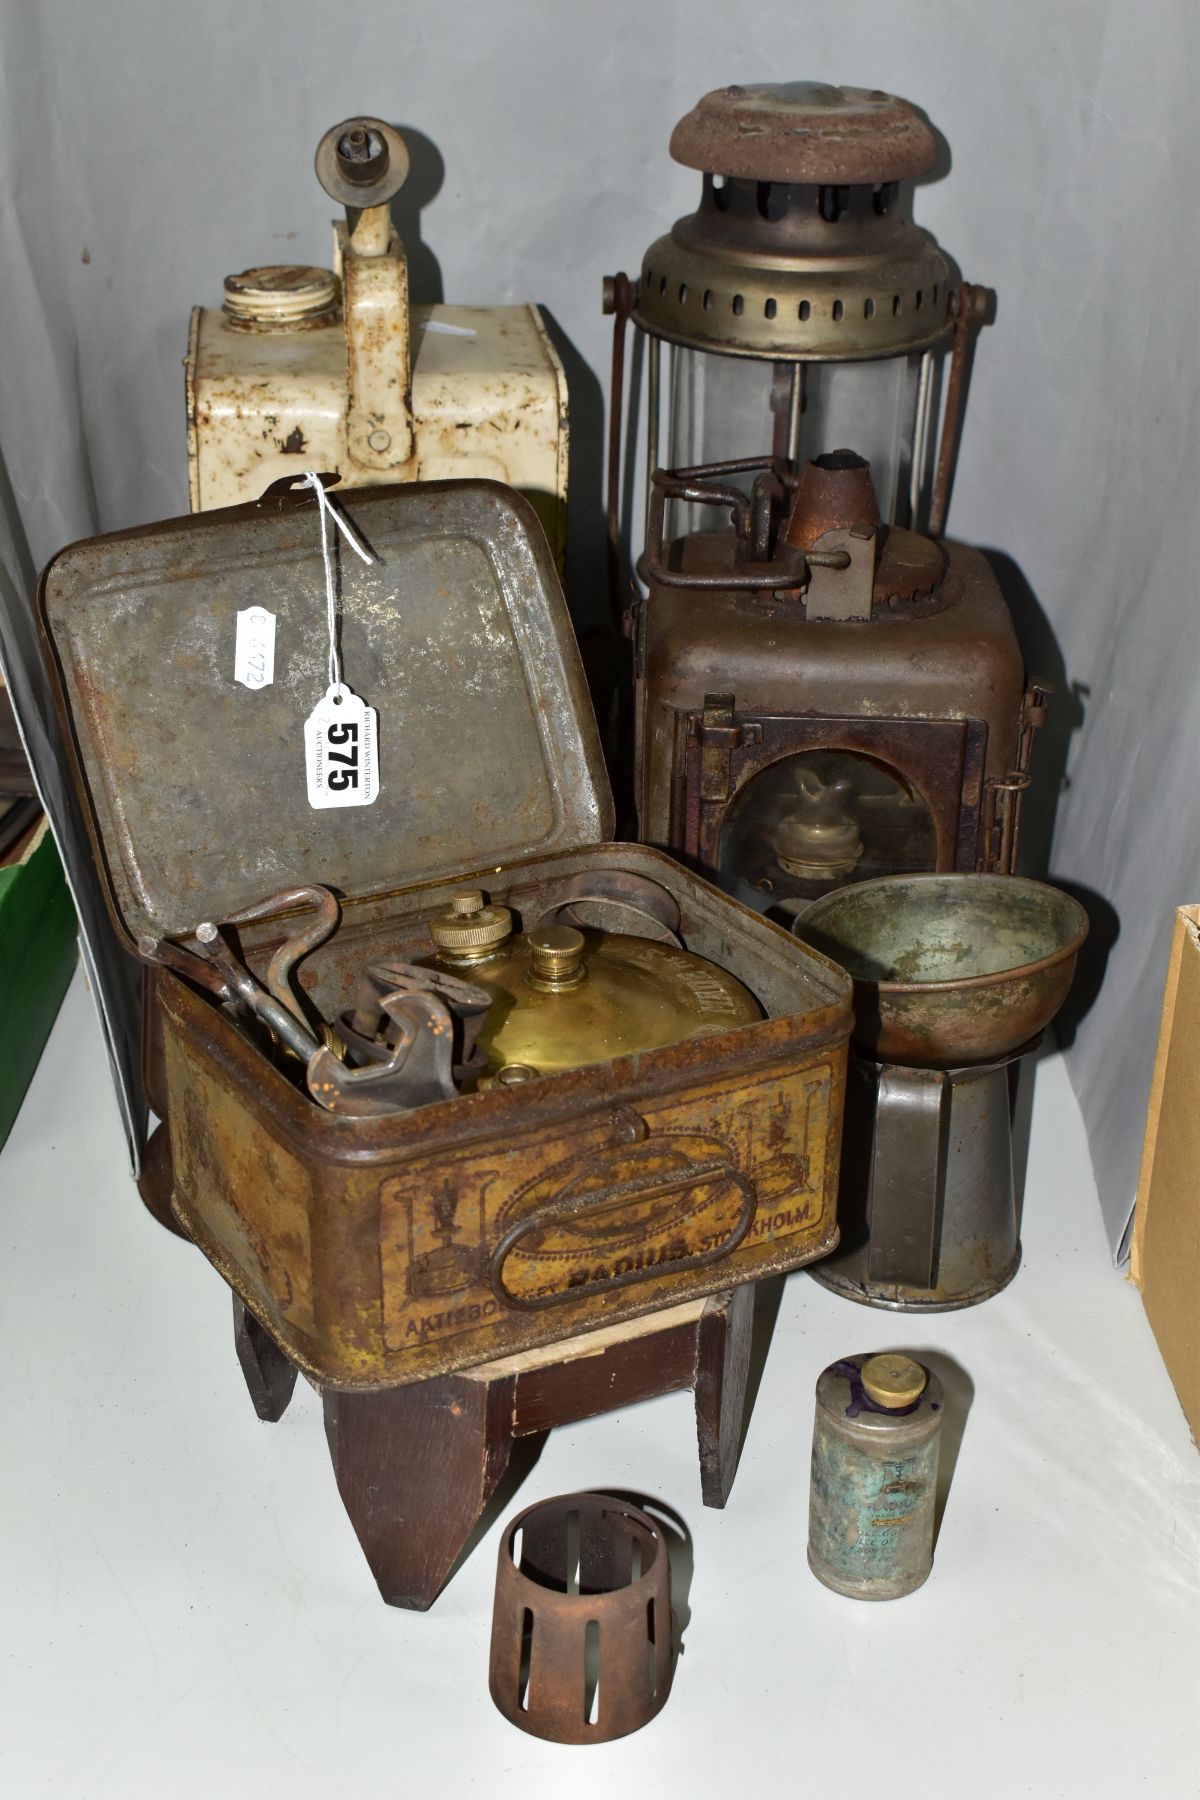 VINTAGE PETROL LAMPS, HEATER AND STOVE ETC, comprising a Radius No21 stove and accessories,